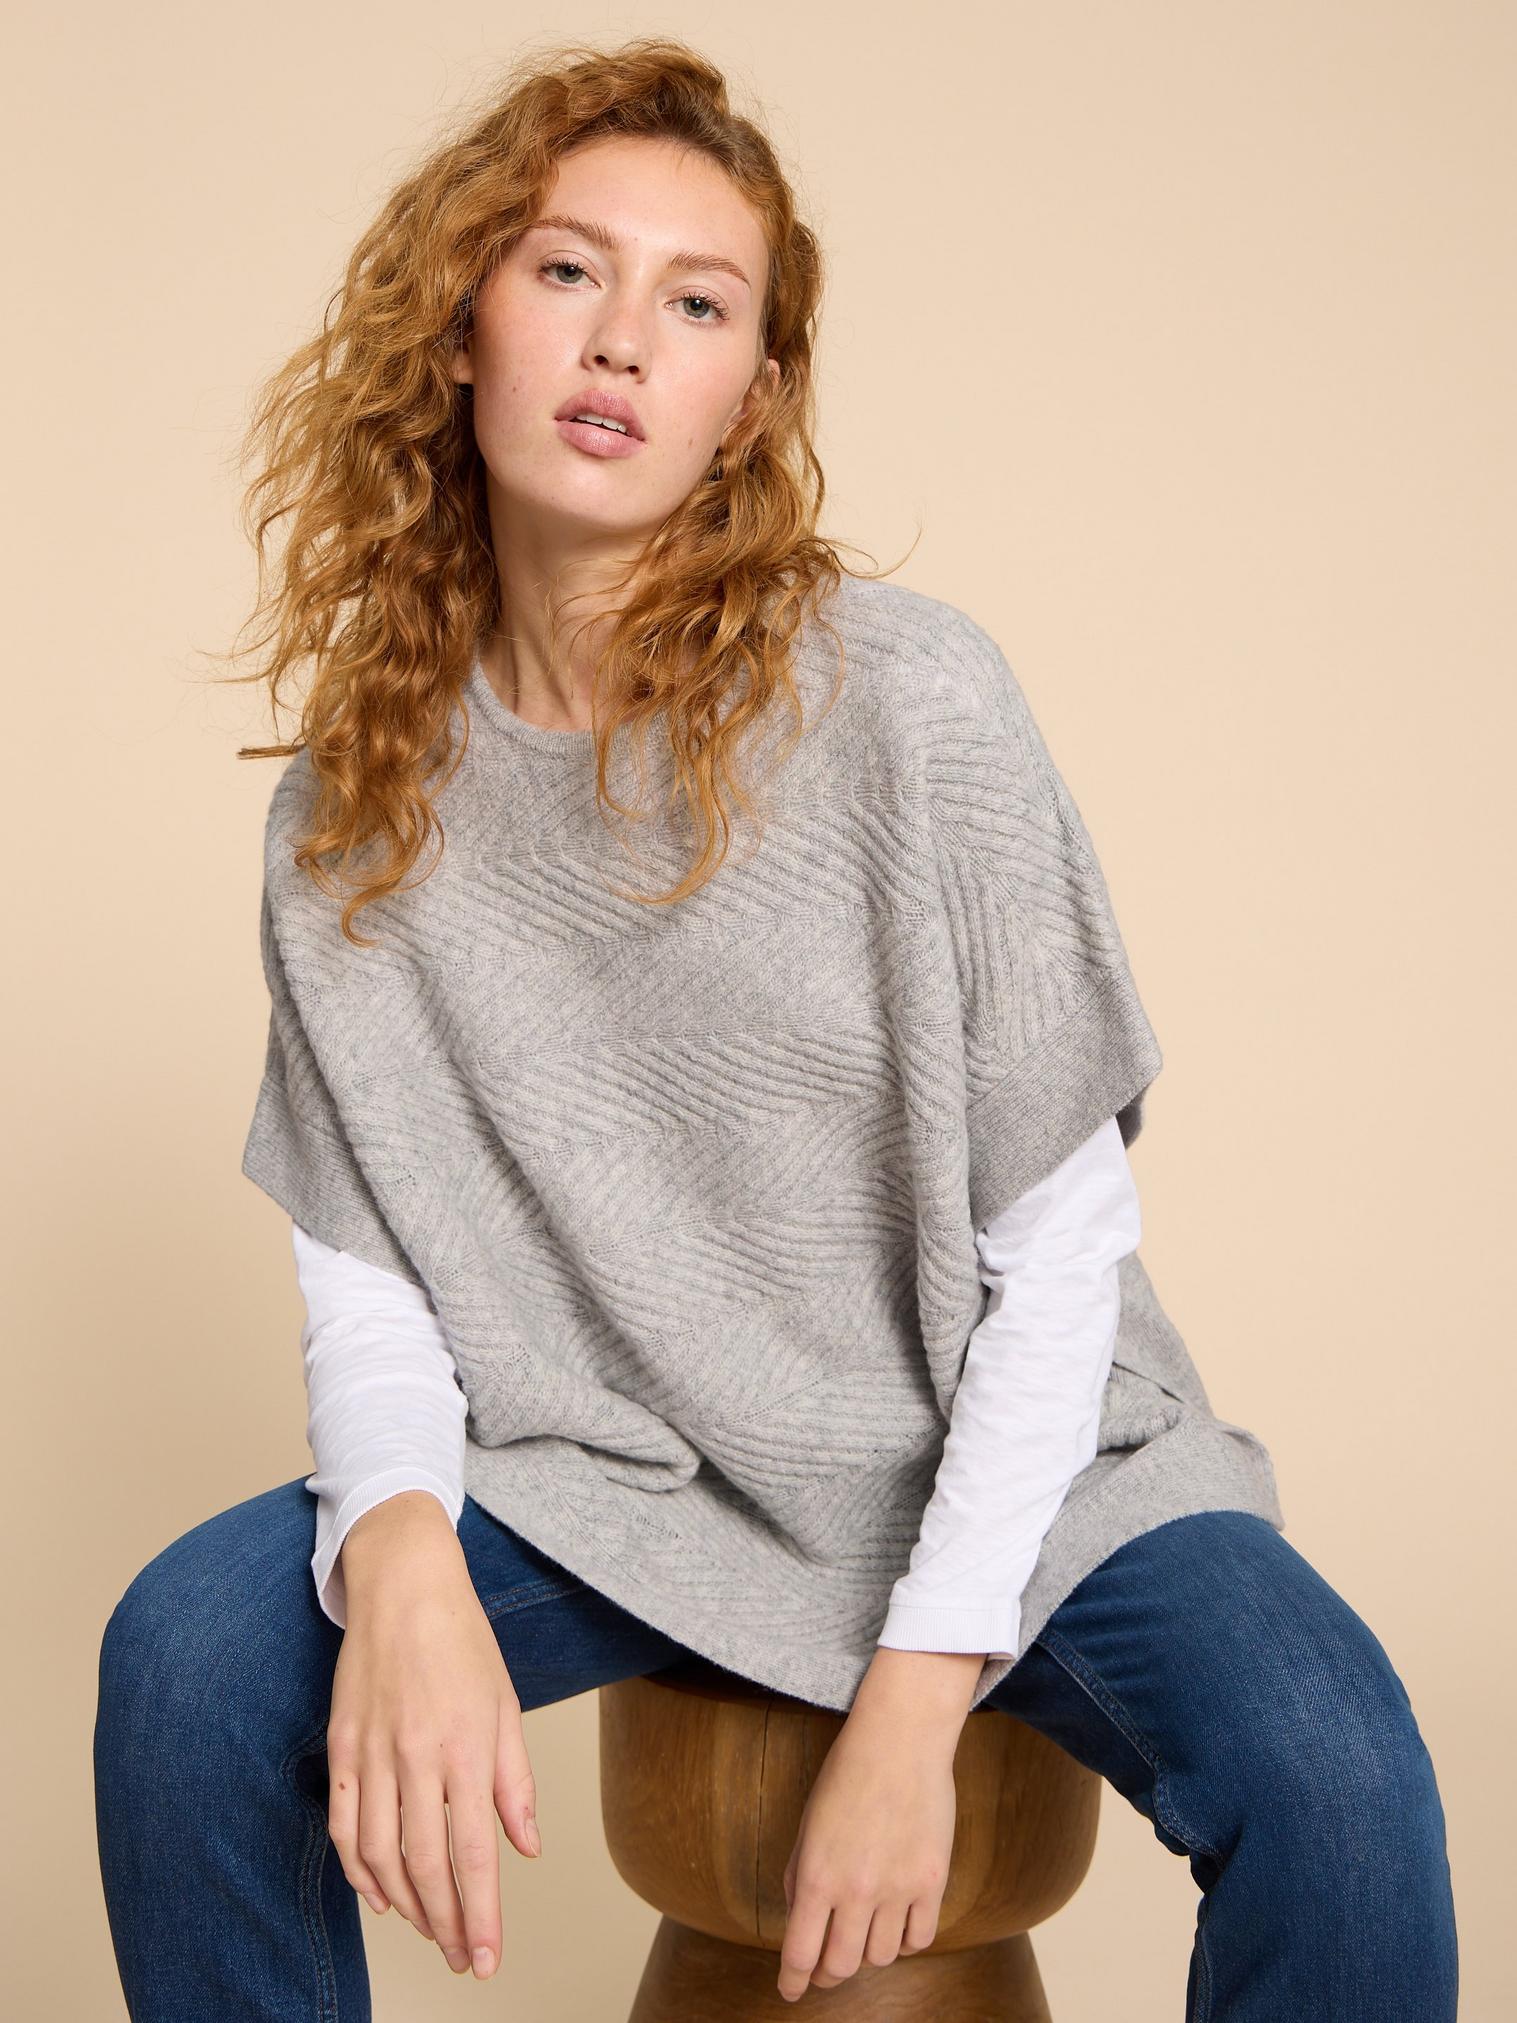 Florence Knitted Poncho in GREY MARL - LIFESTYLE